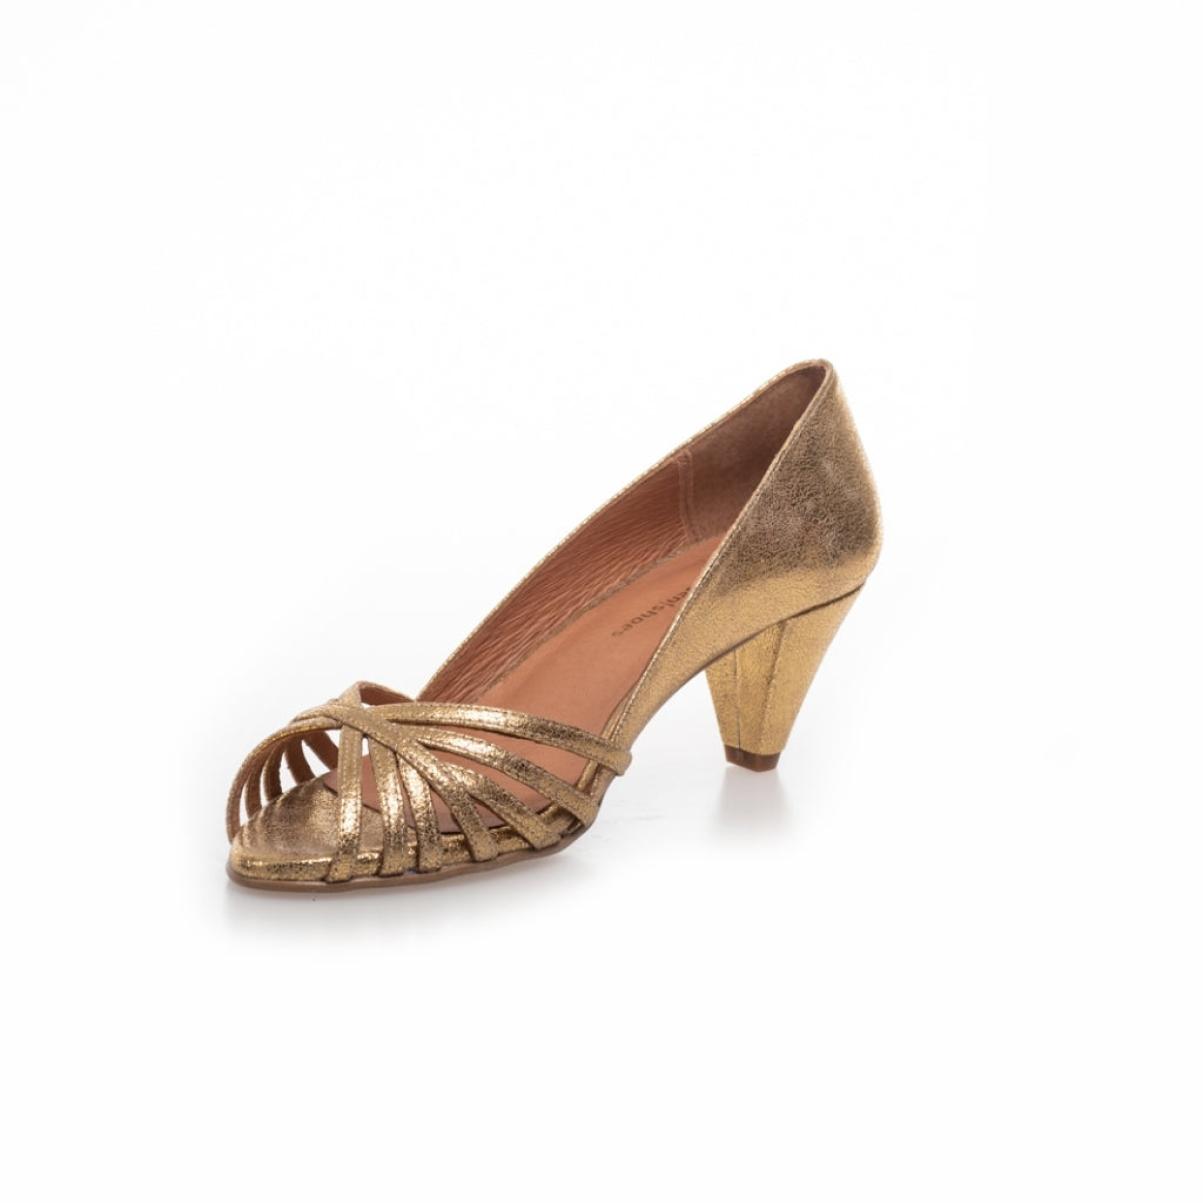 Copenhagen Shoes Reliable All I Need - Gold Women Sandals - 2